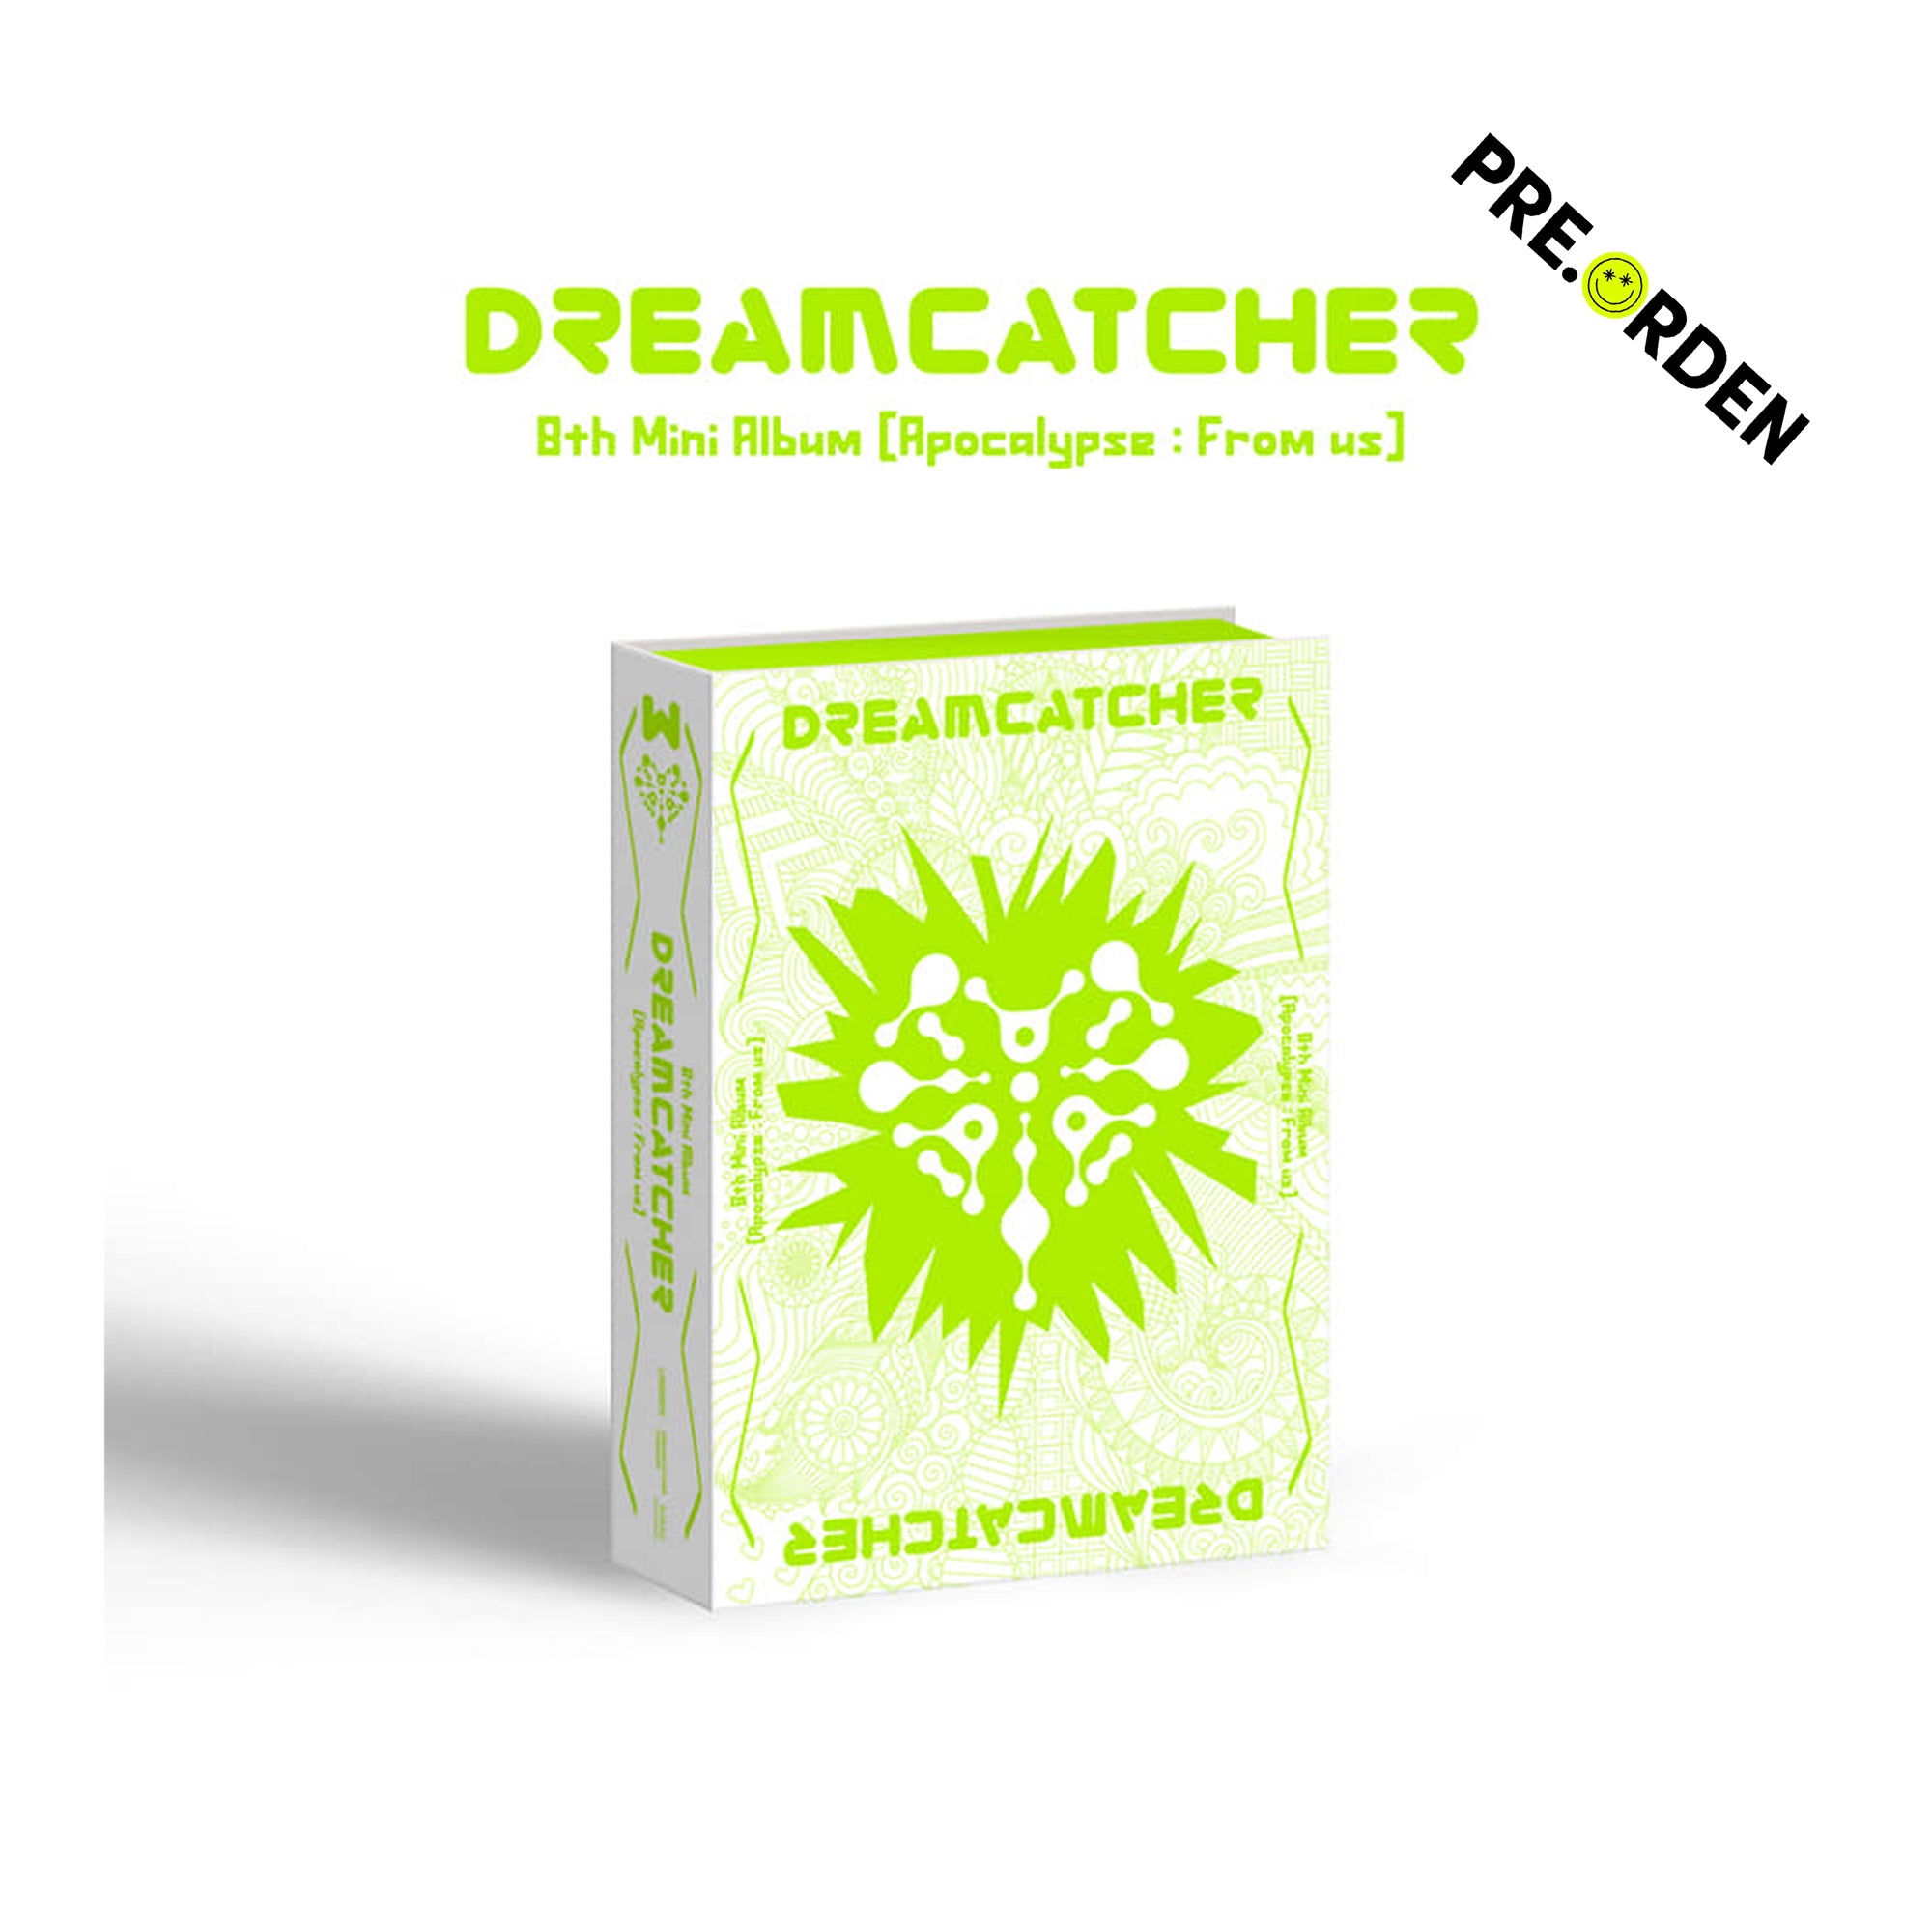 DREAMCATCHER - Apocalypse : From us (Limited Edition)